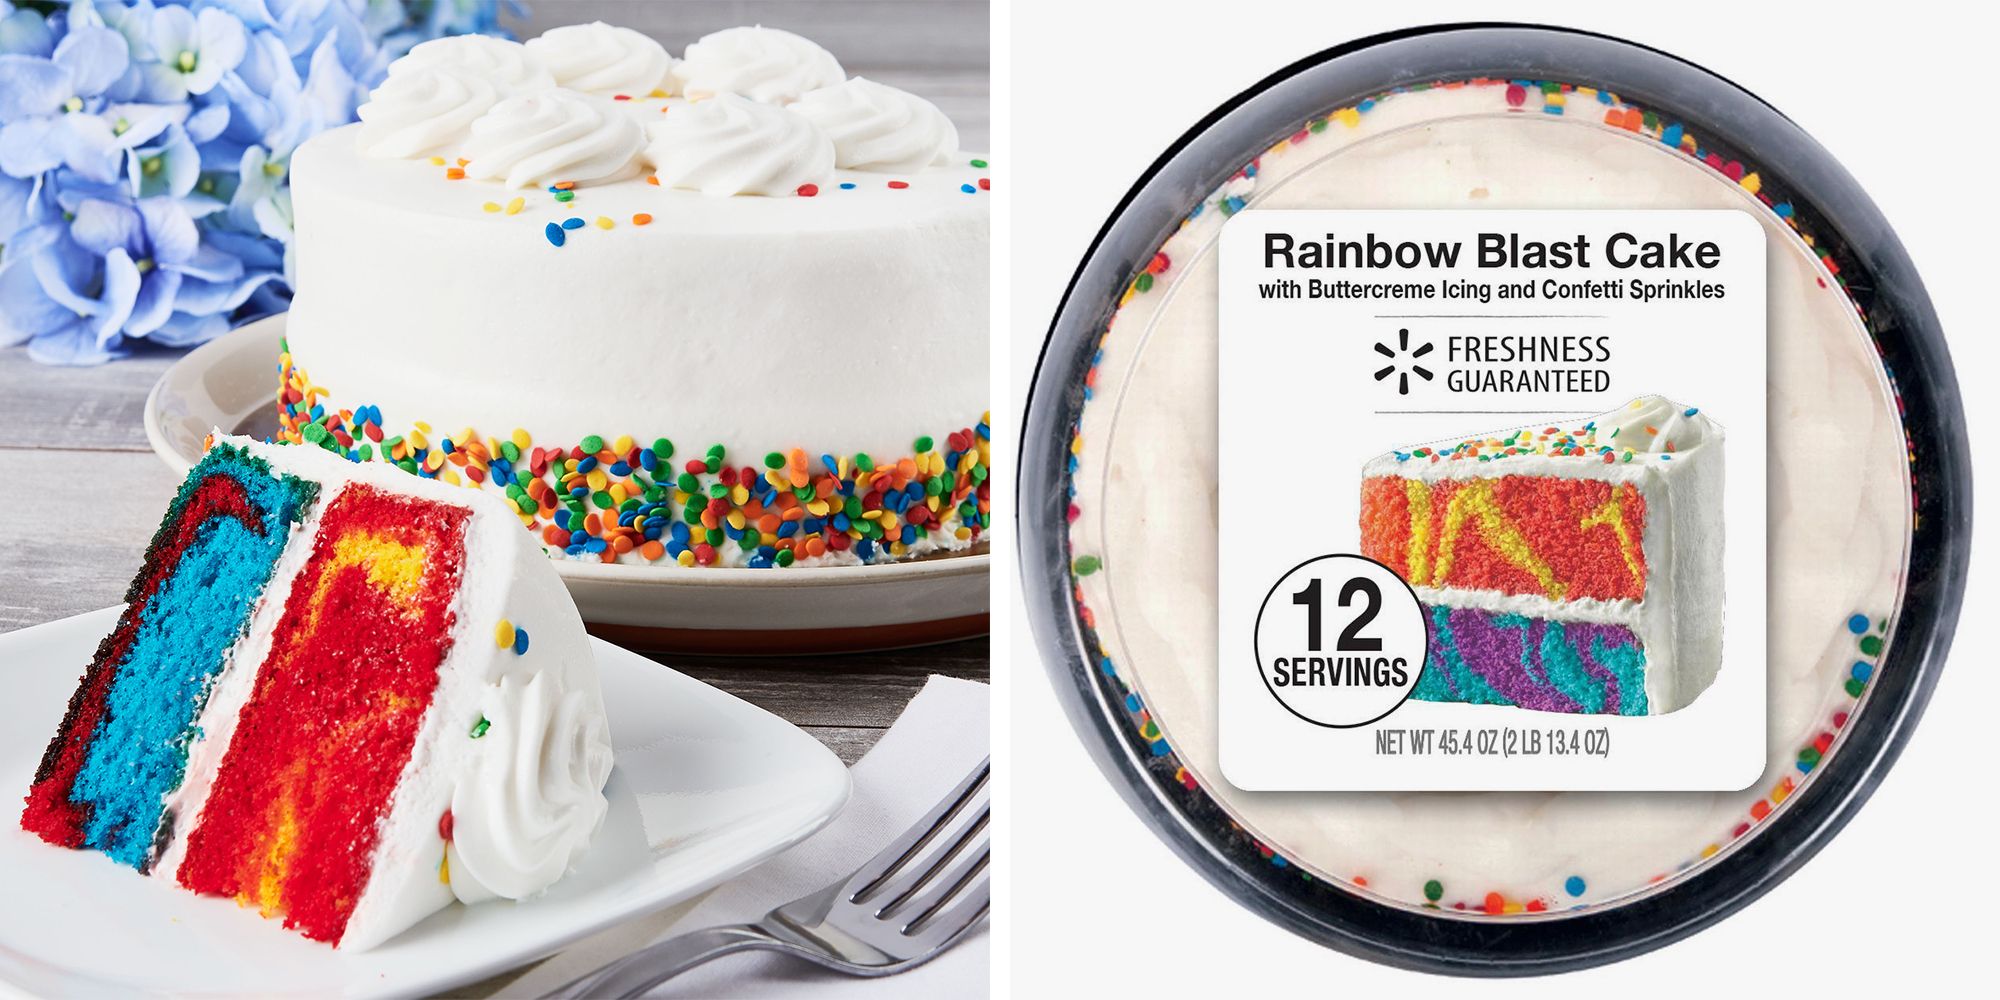 Order a Kid's Birthday Cake at Cold Stone Creamery